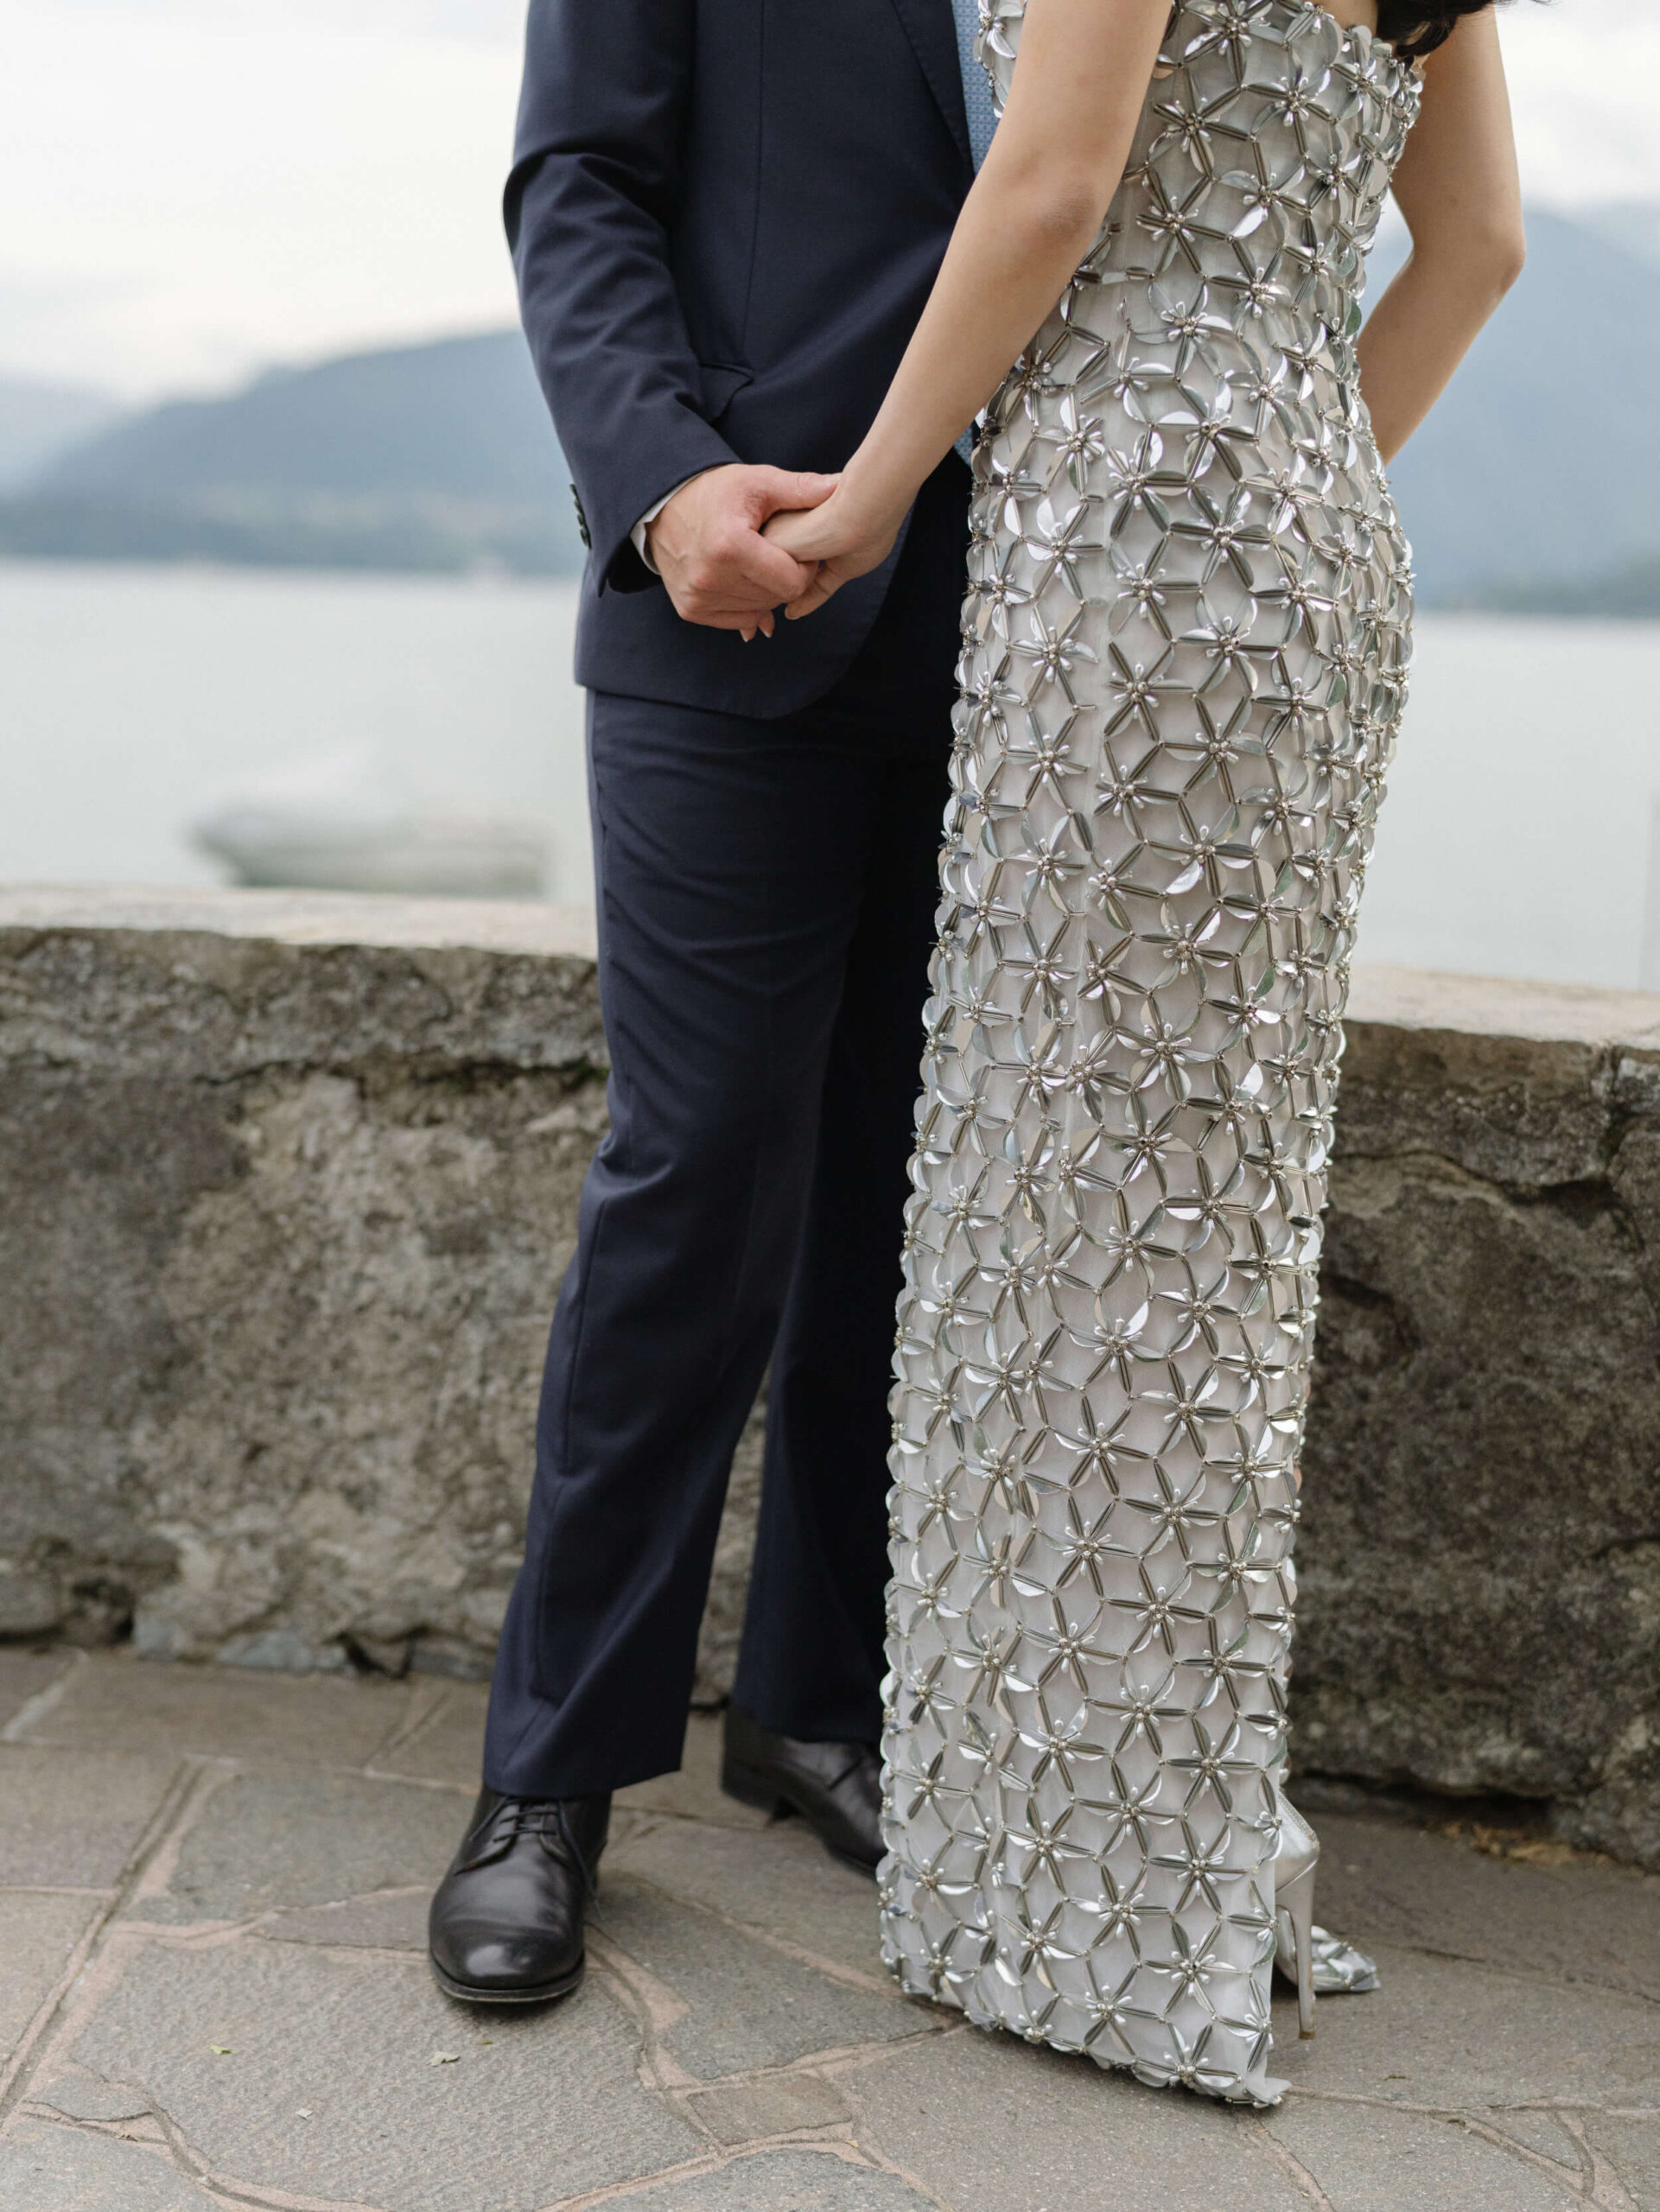 K + J holding hands; Lake Como in the background